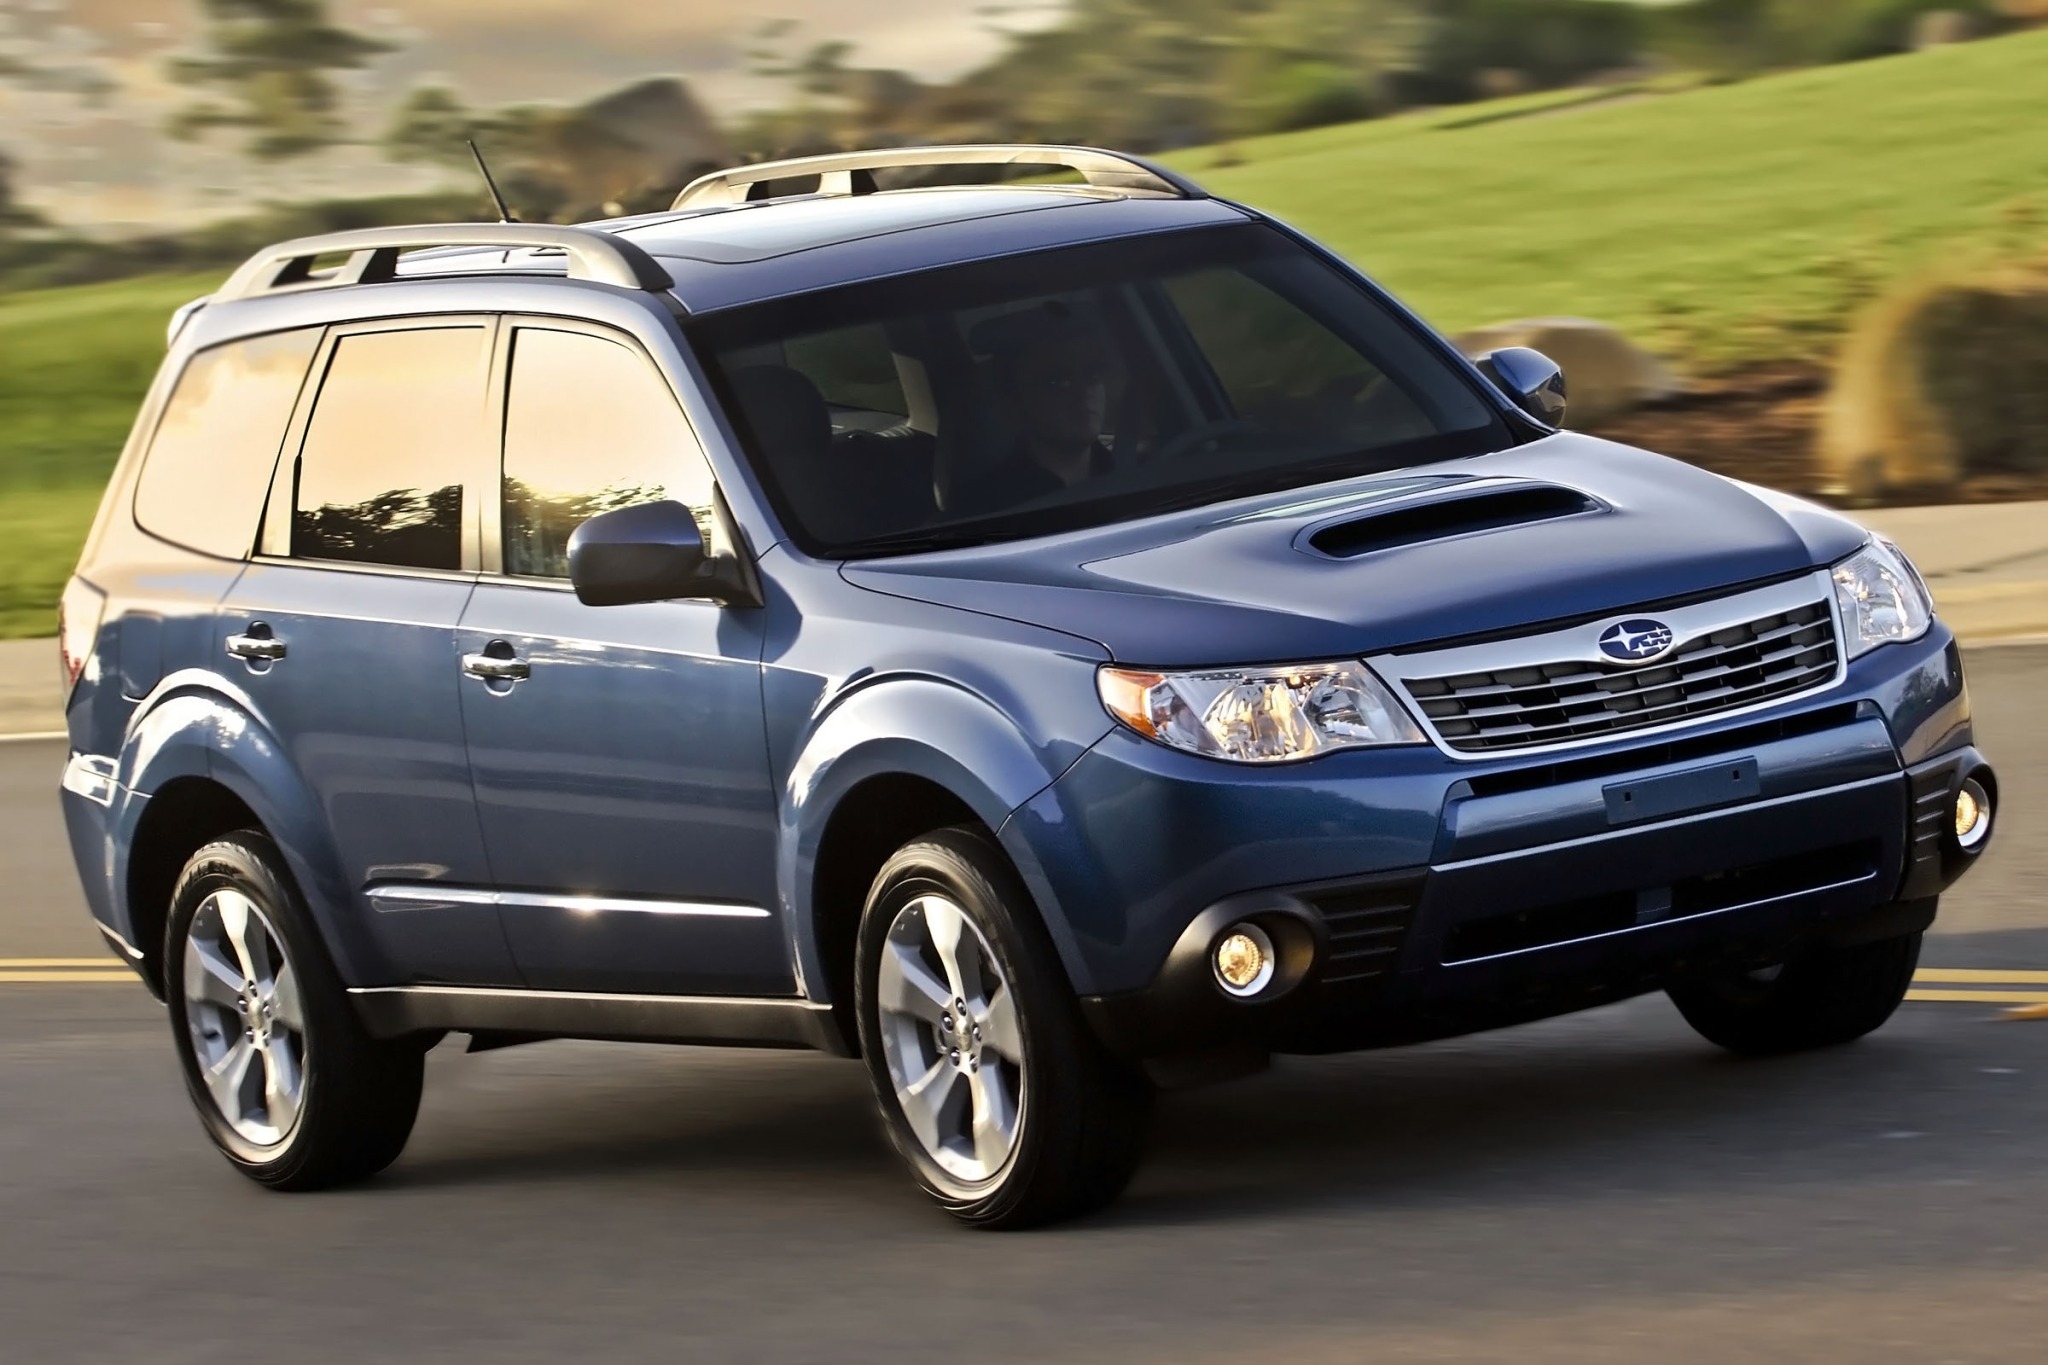 2013 Subaru Forester 2.5X VIN Number Search AutoDetective